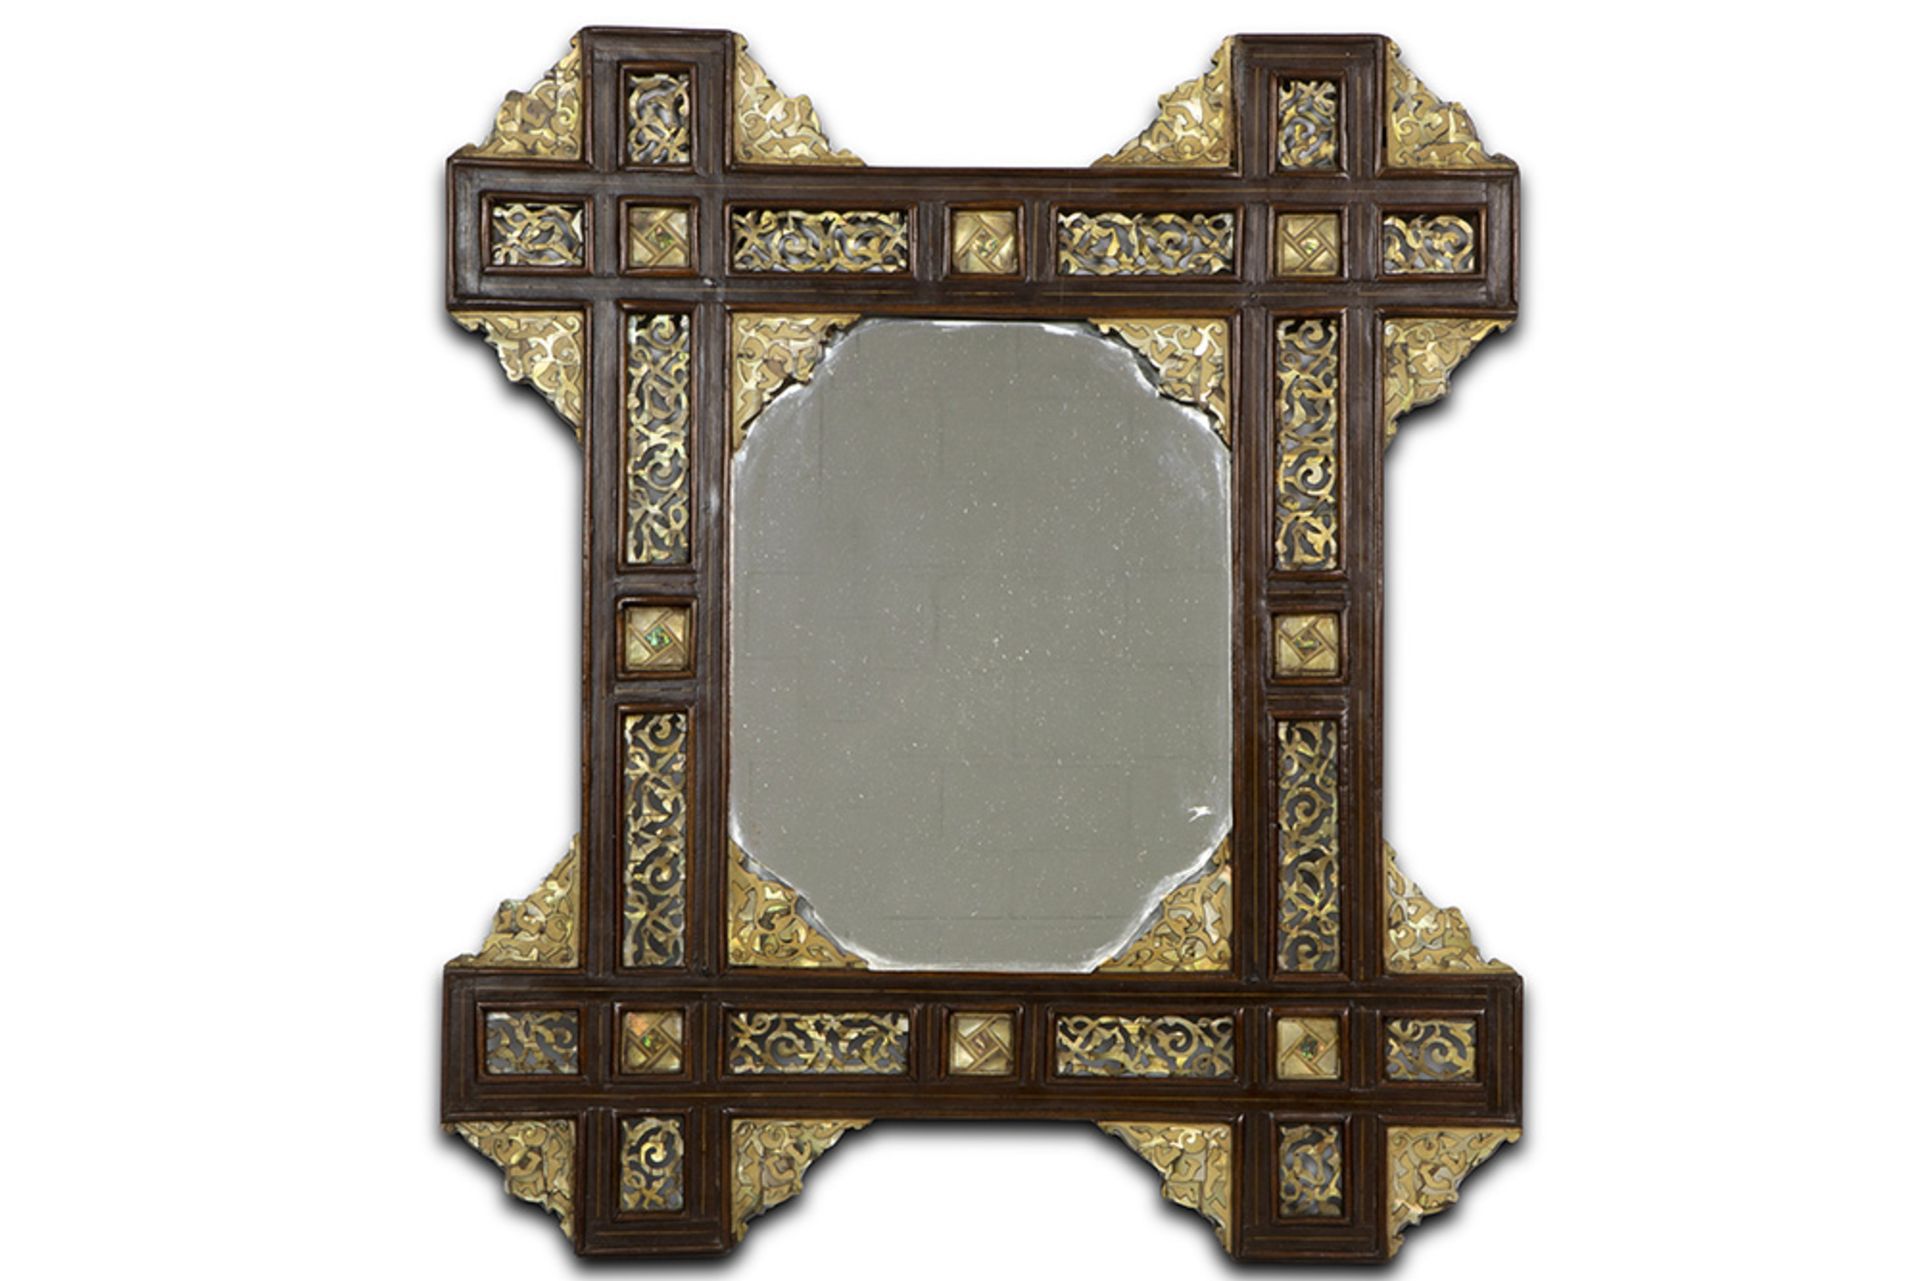 Syrian mirror with typical decoration, inlaid with mother of pearl || Syrische spiegel met